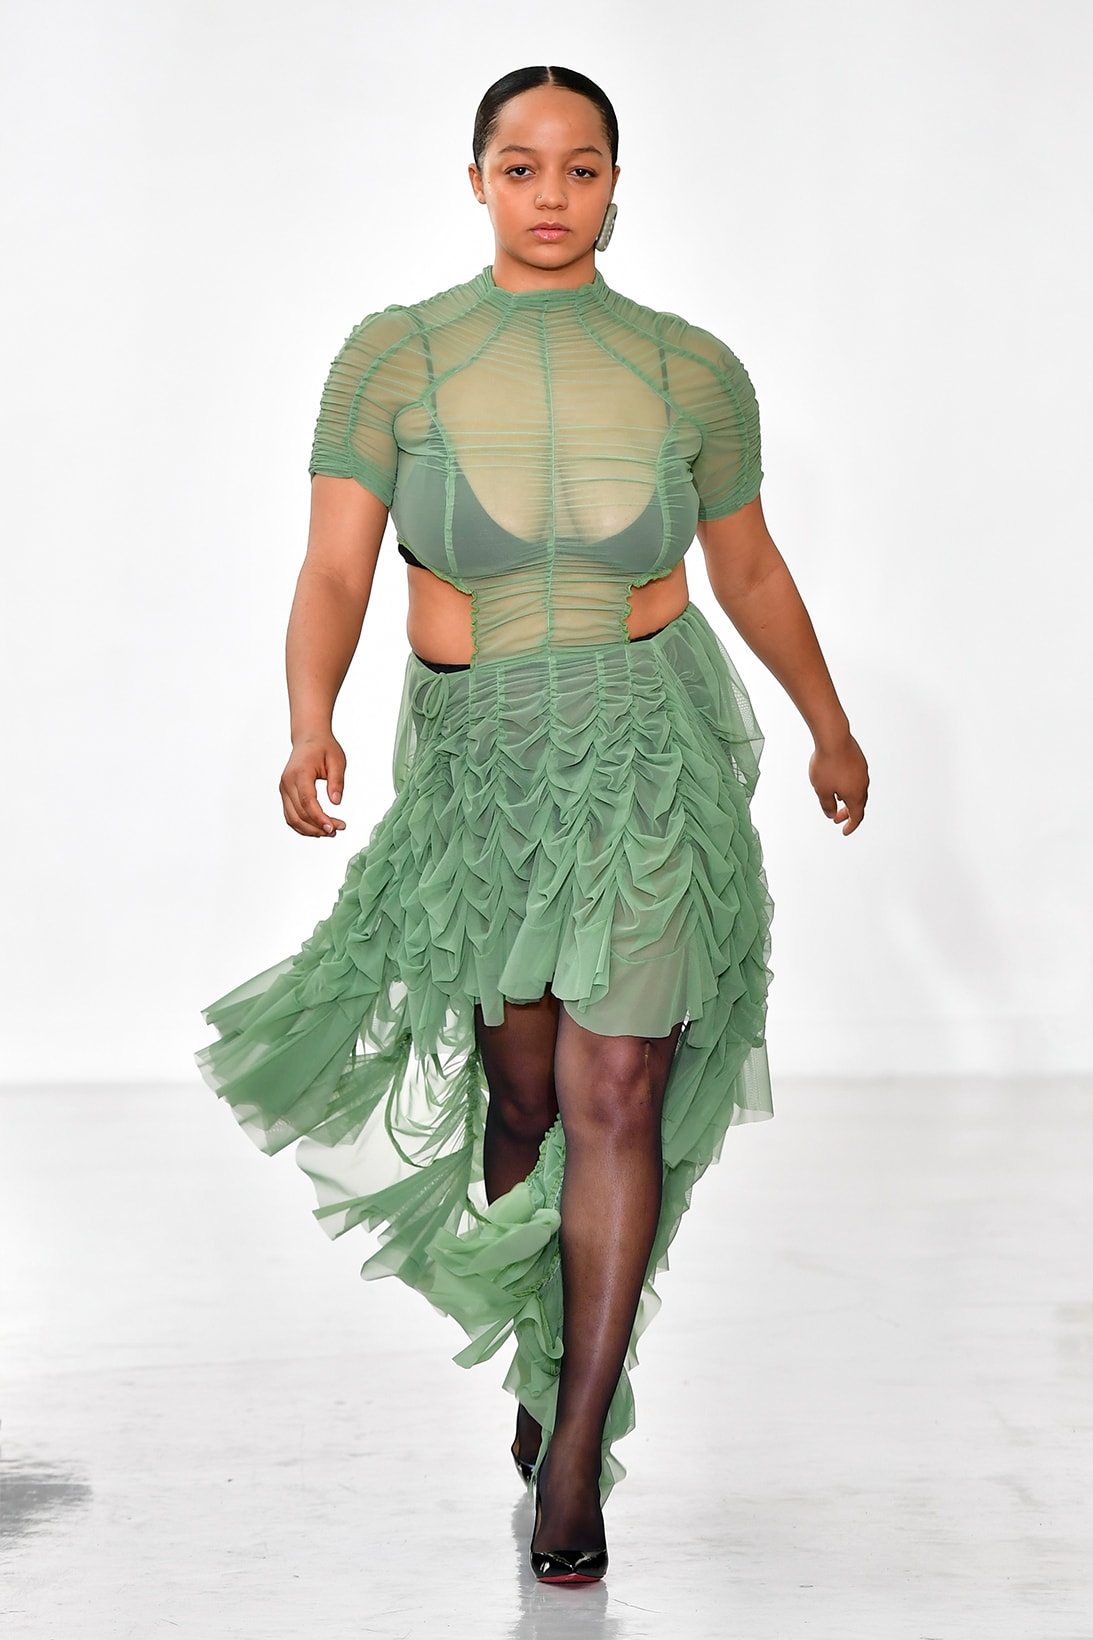 Ester Manas Fall Winter Collection Size Inclusivity Cut-Outs Fashion Week Runway Show Photos Transparent Green Dress